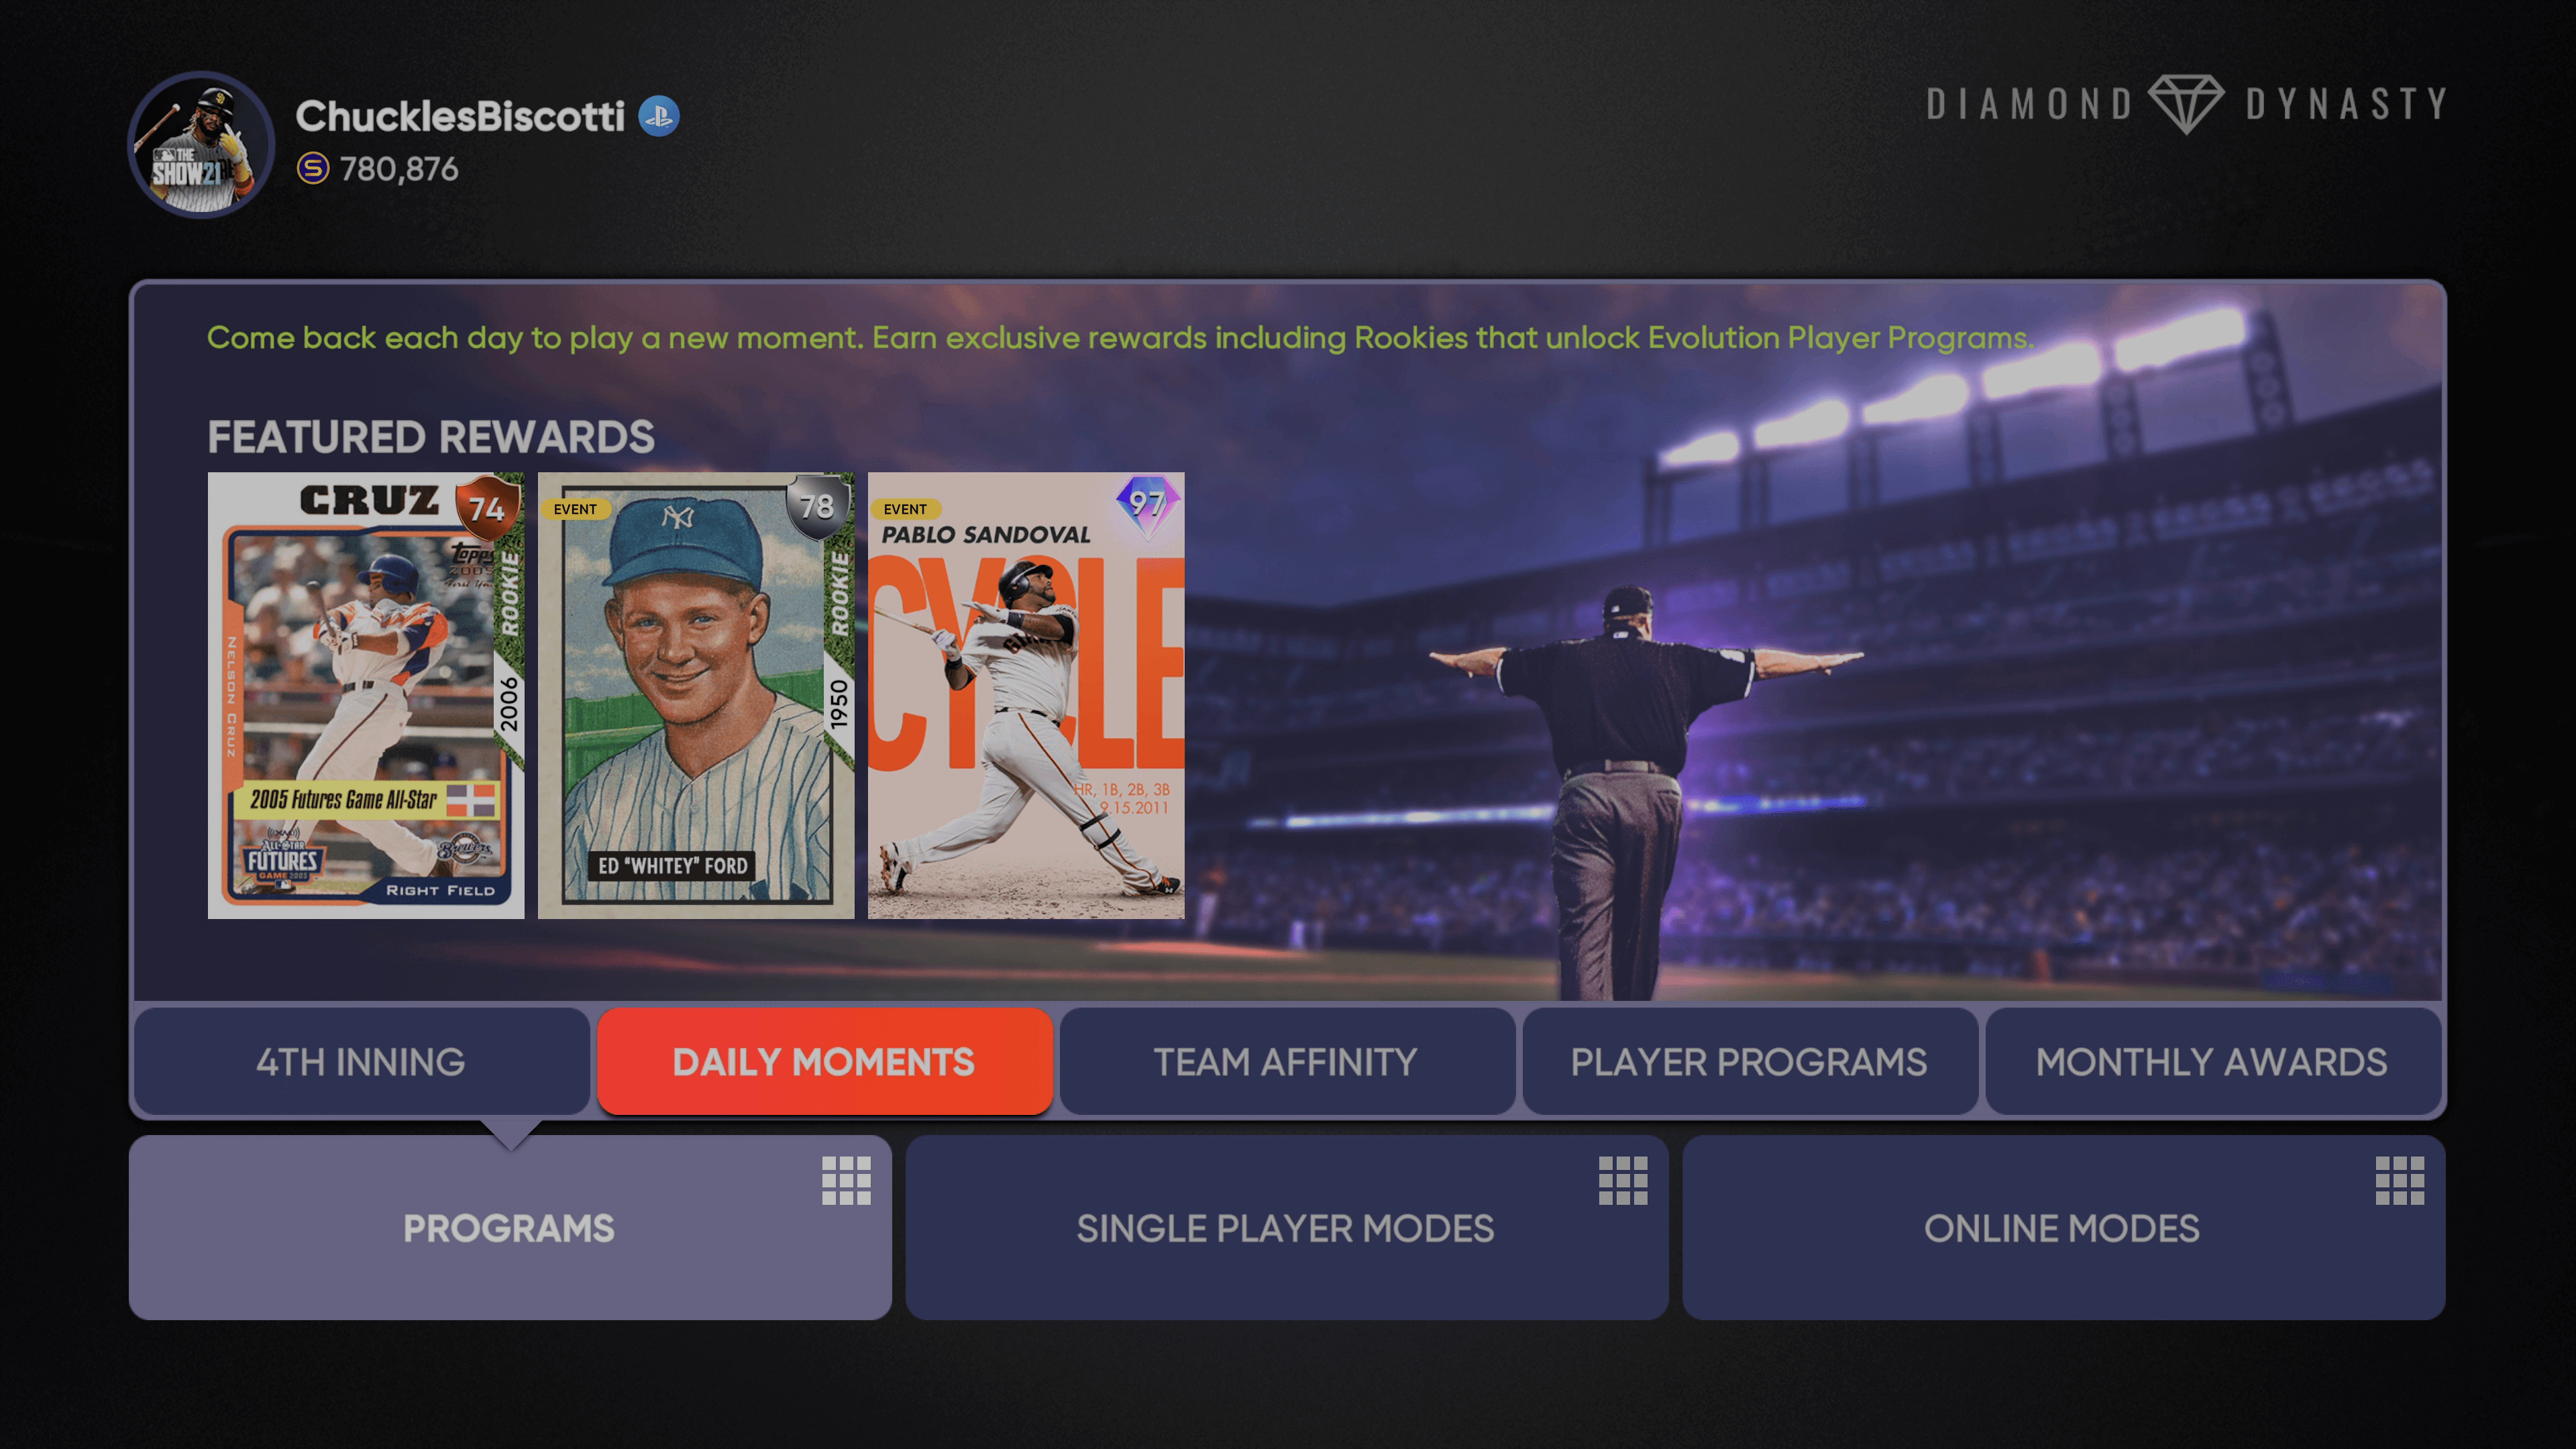 MLB The Show on X: 🧠DOUBLE DAILY MOMENT POINTS🧠 Go play your Daily  Moment today and get Double Points towards 💎Milestone Pablo Sandoval and  the Nelson Cruz and Whitey Ford Evolution Keys! #